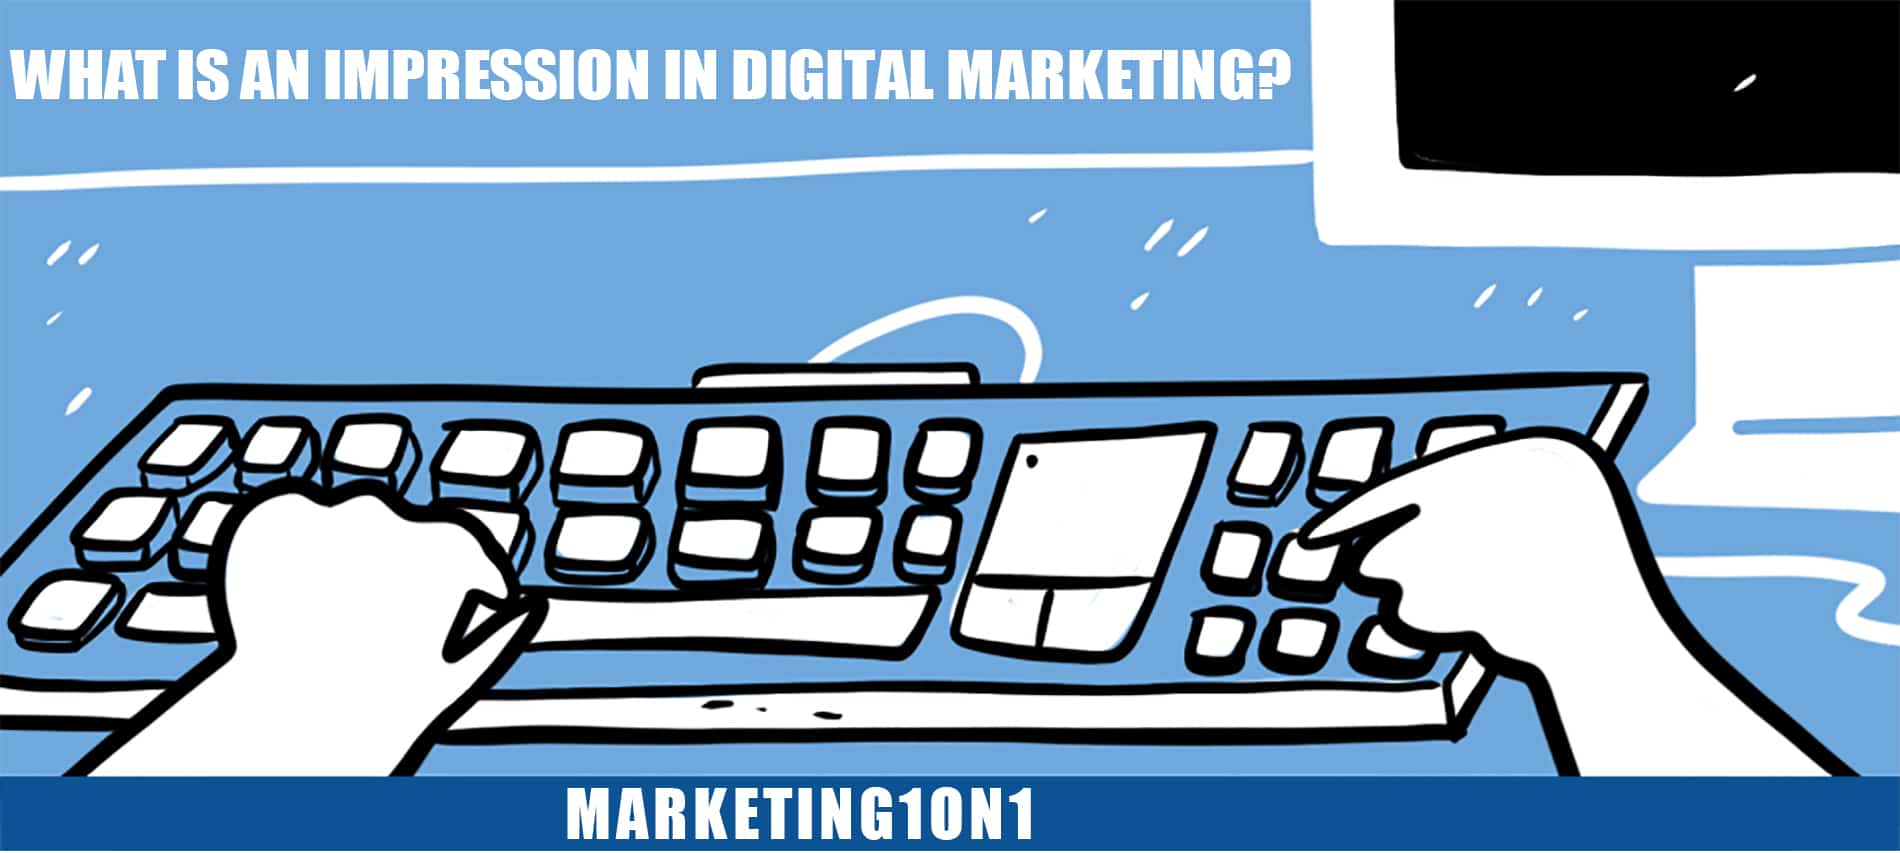 What is an impression in digital marketing?